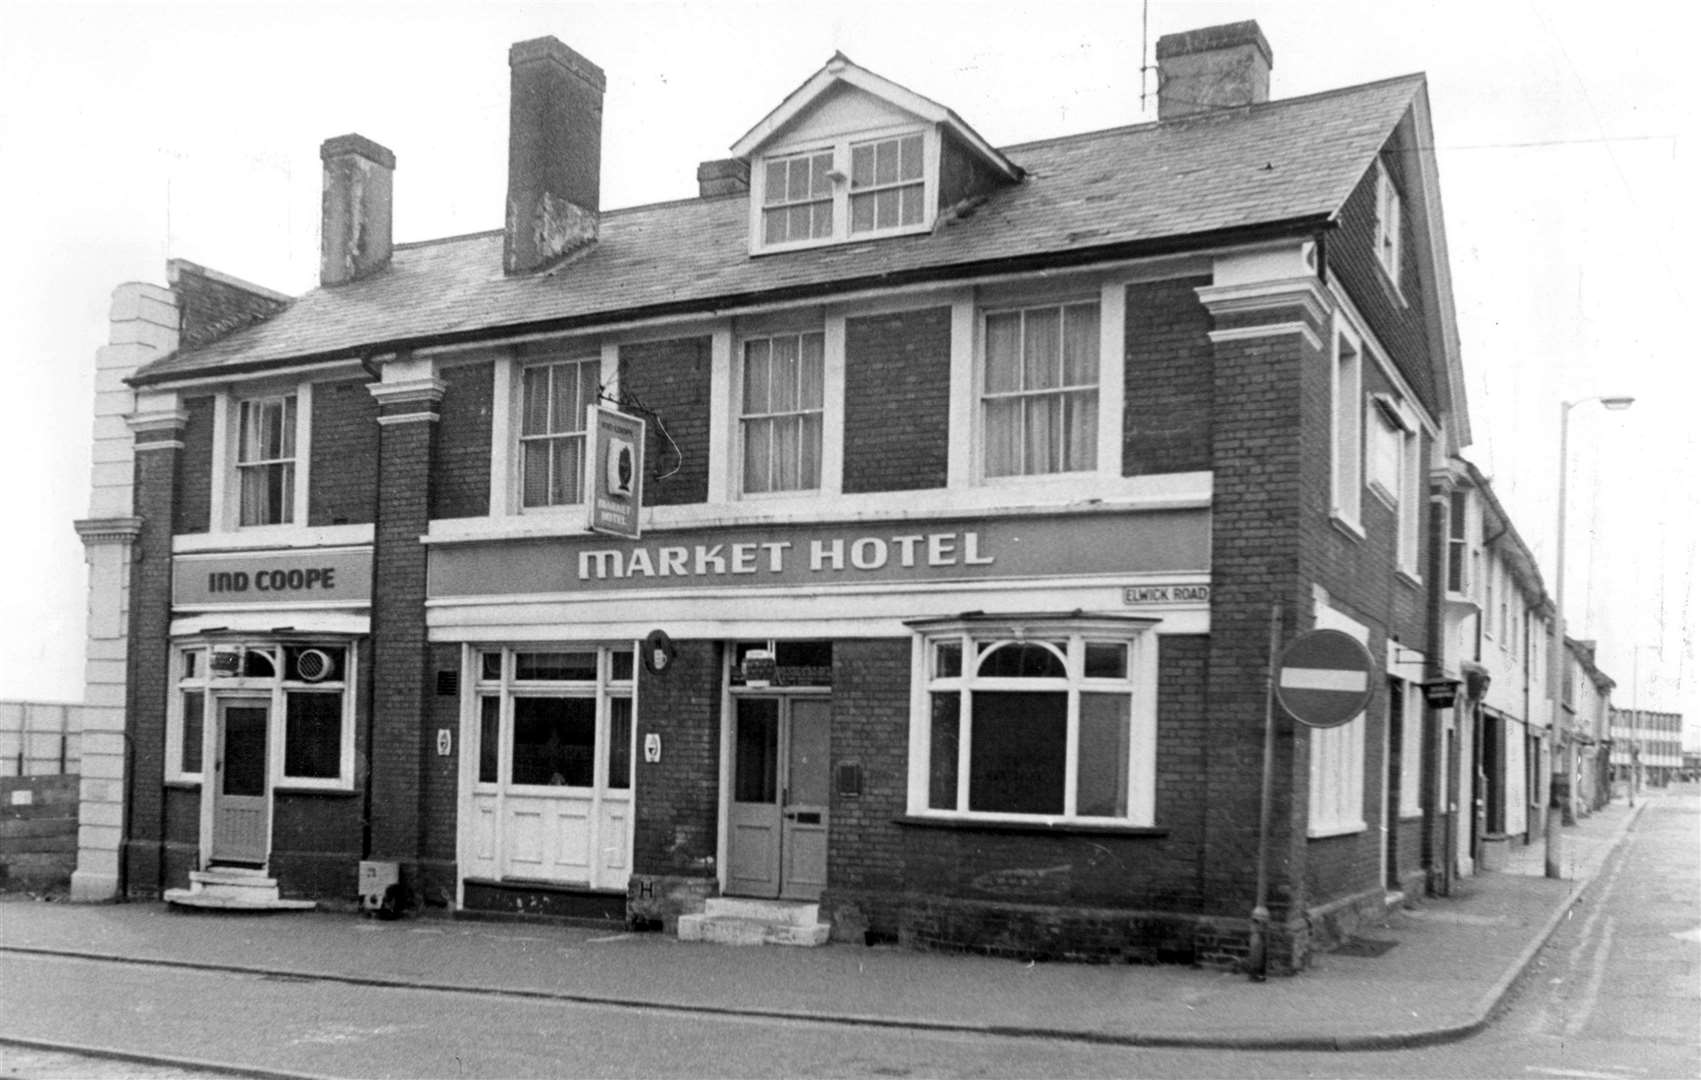 The Market Hotel in Ashford's Elwick Road in 1975. The hostelry became the Wig and Gavel in the early 1980s and was subsequently demolished somewhat prematurely in 1993, as it wasn't until 2005 that work started on the County Square extension. Picture: Steve Salter